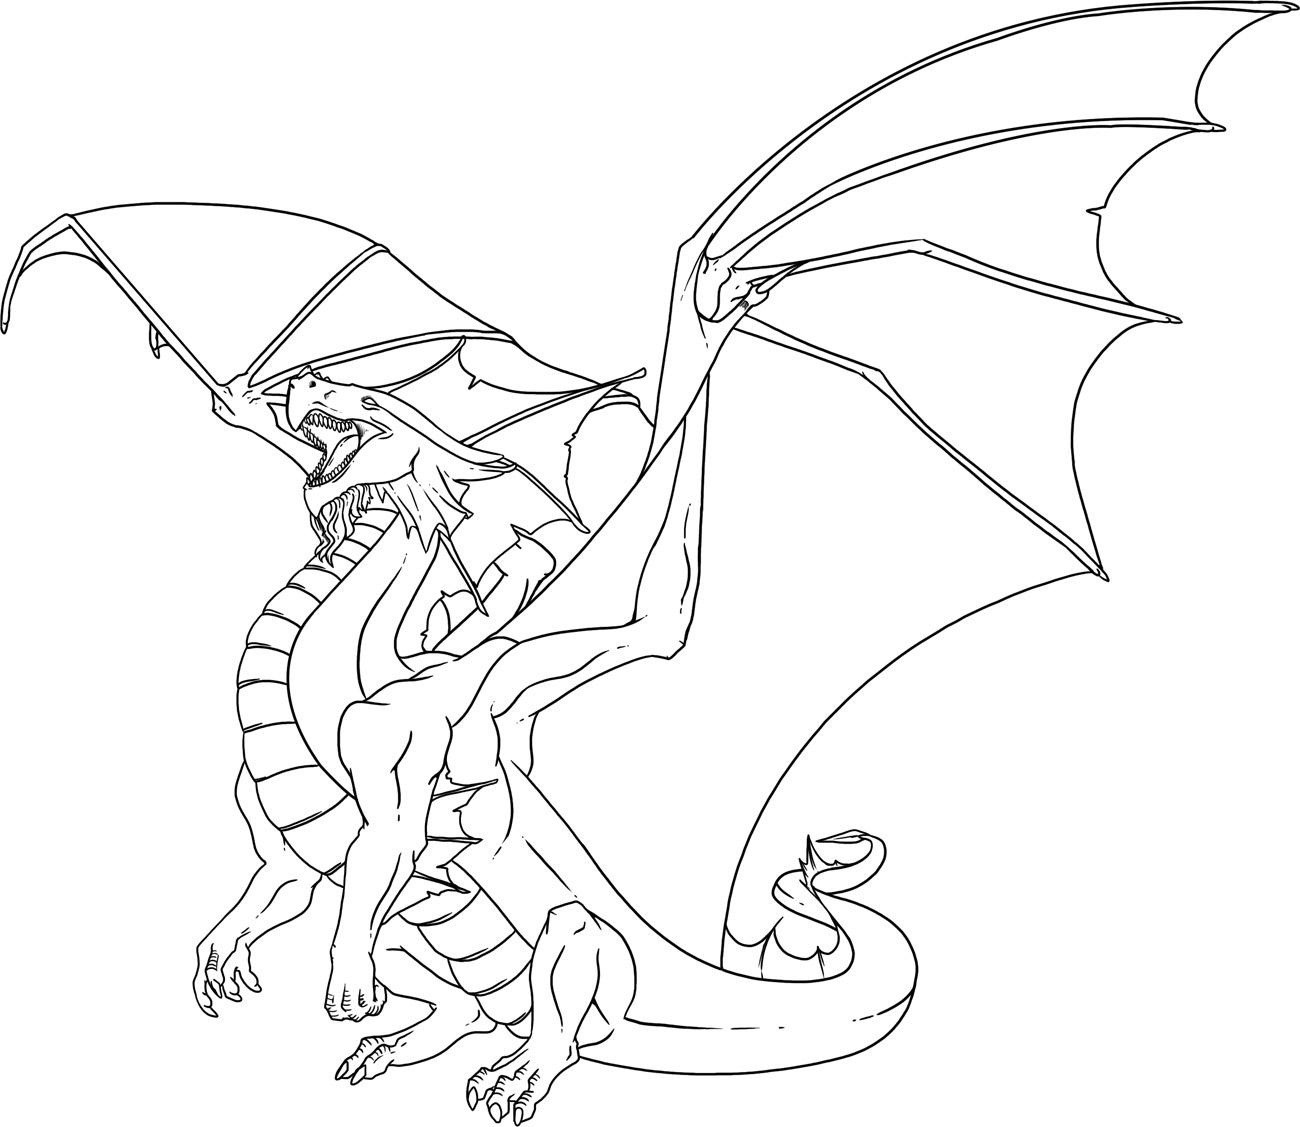 Coloring Pages For Adults Dragon
 dragon coloring pages printable